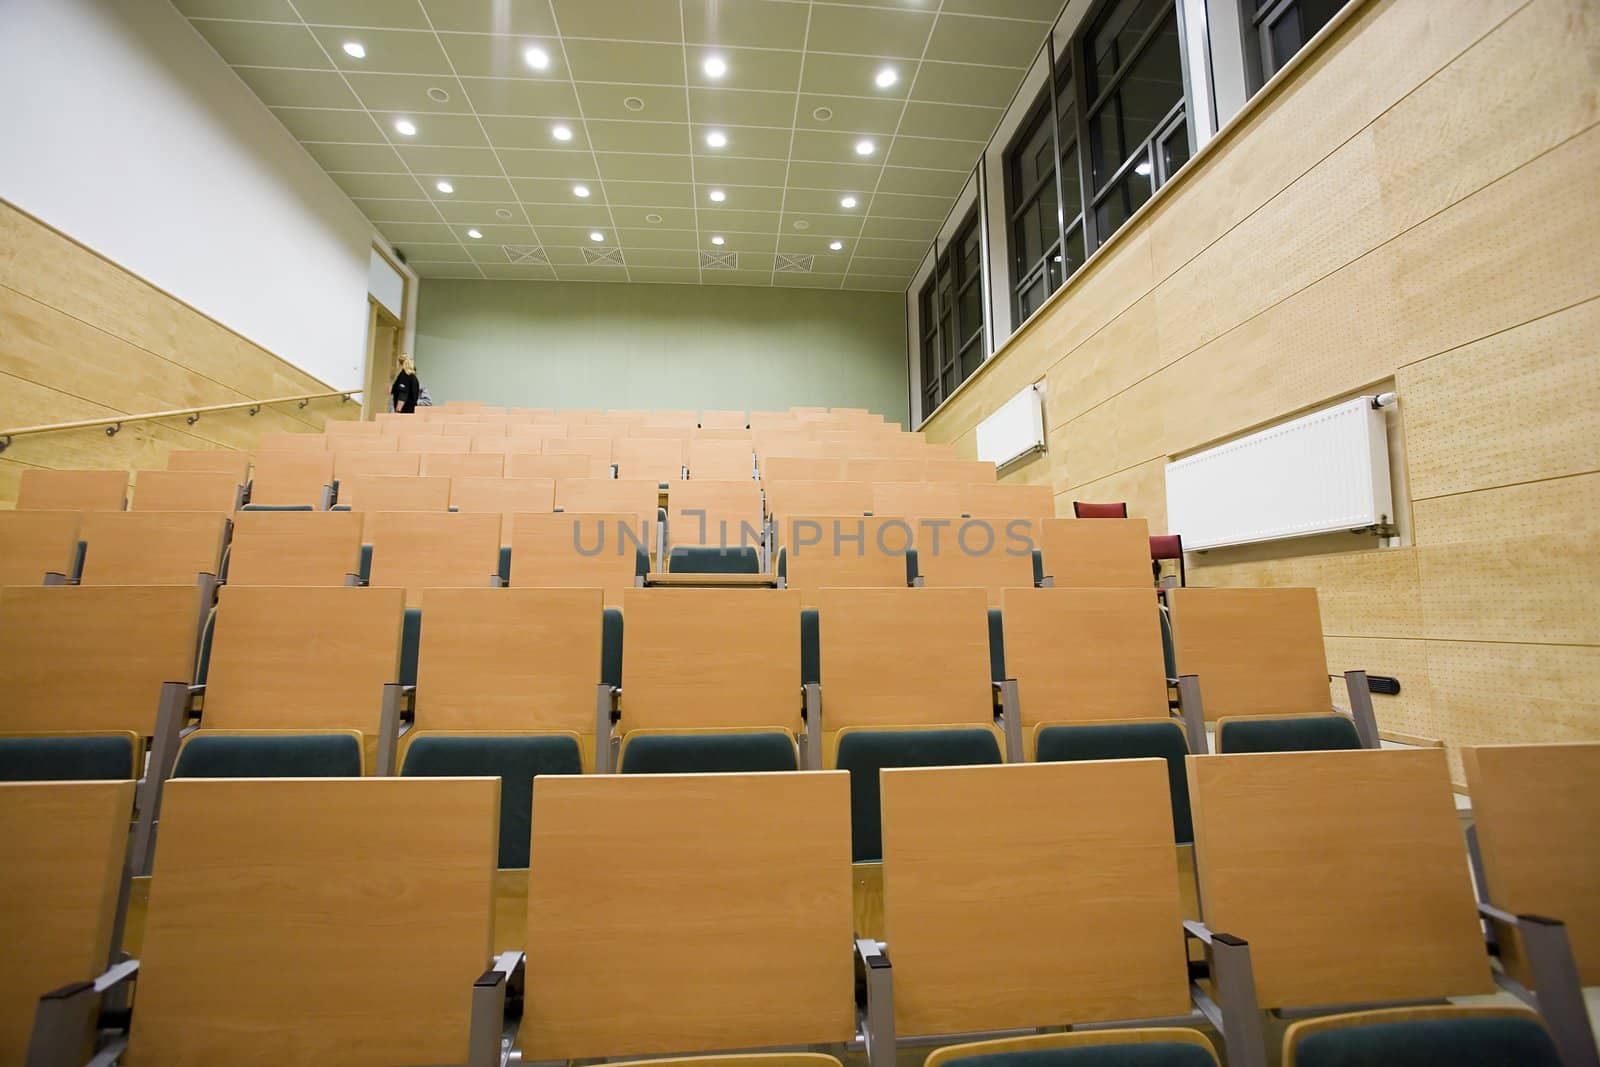 lecture hall by furzyk73